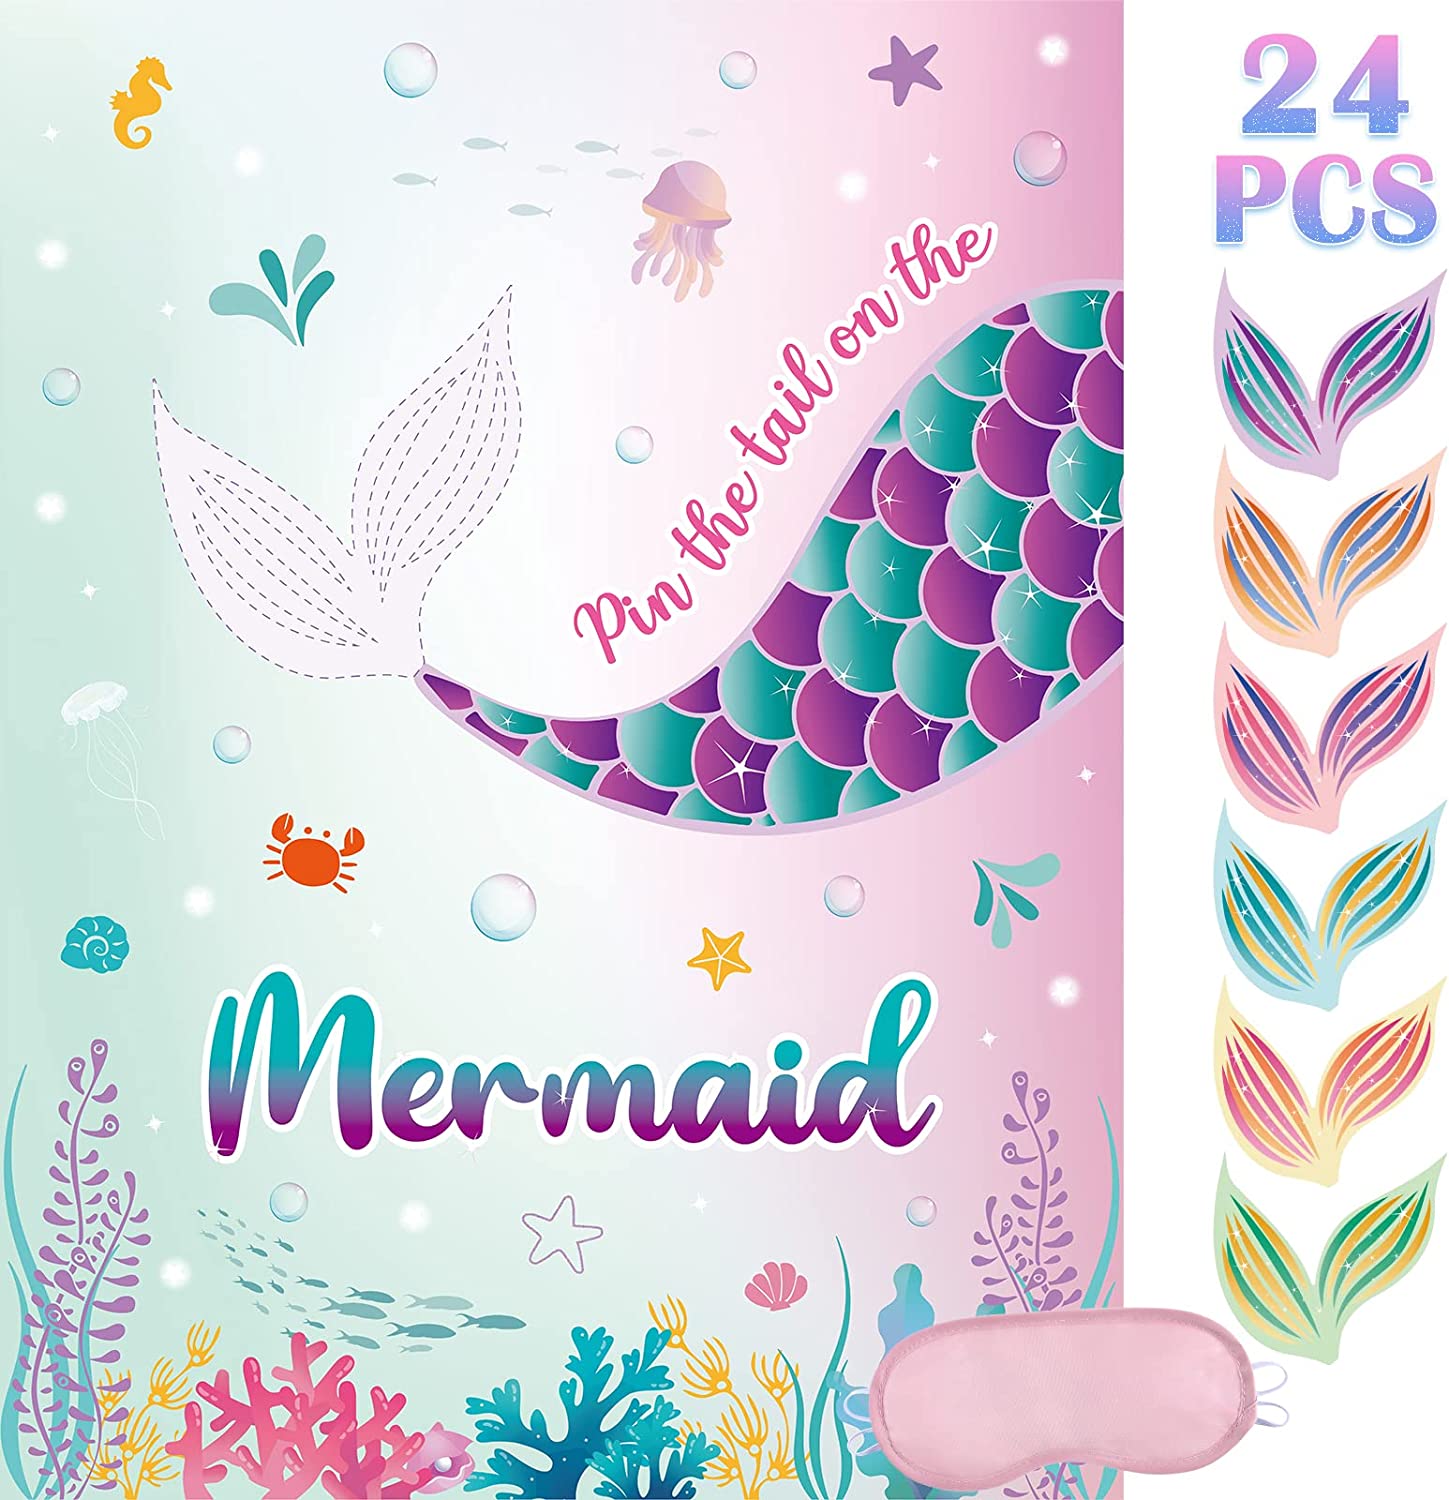 Pin The Tail On The Mermaid